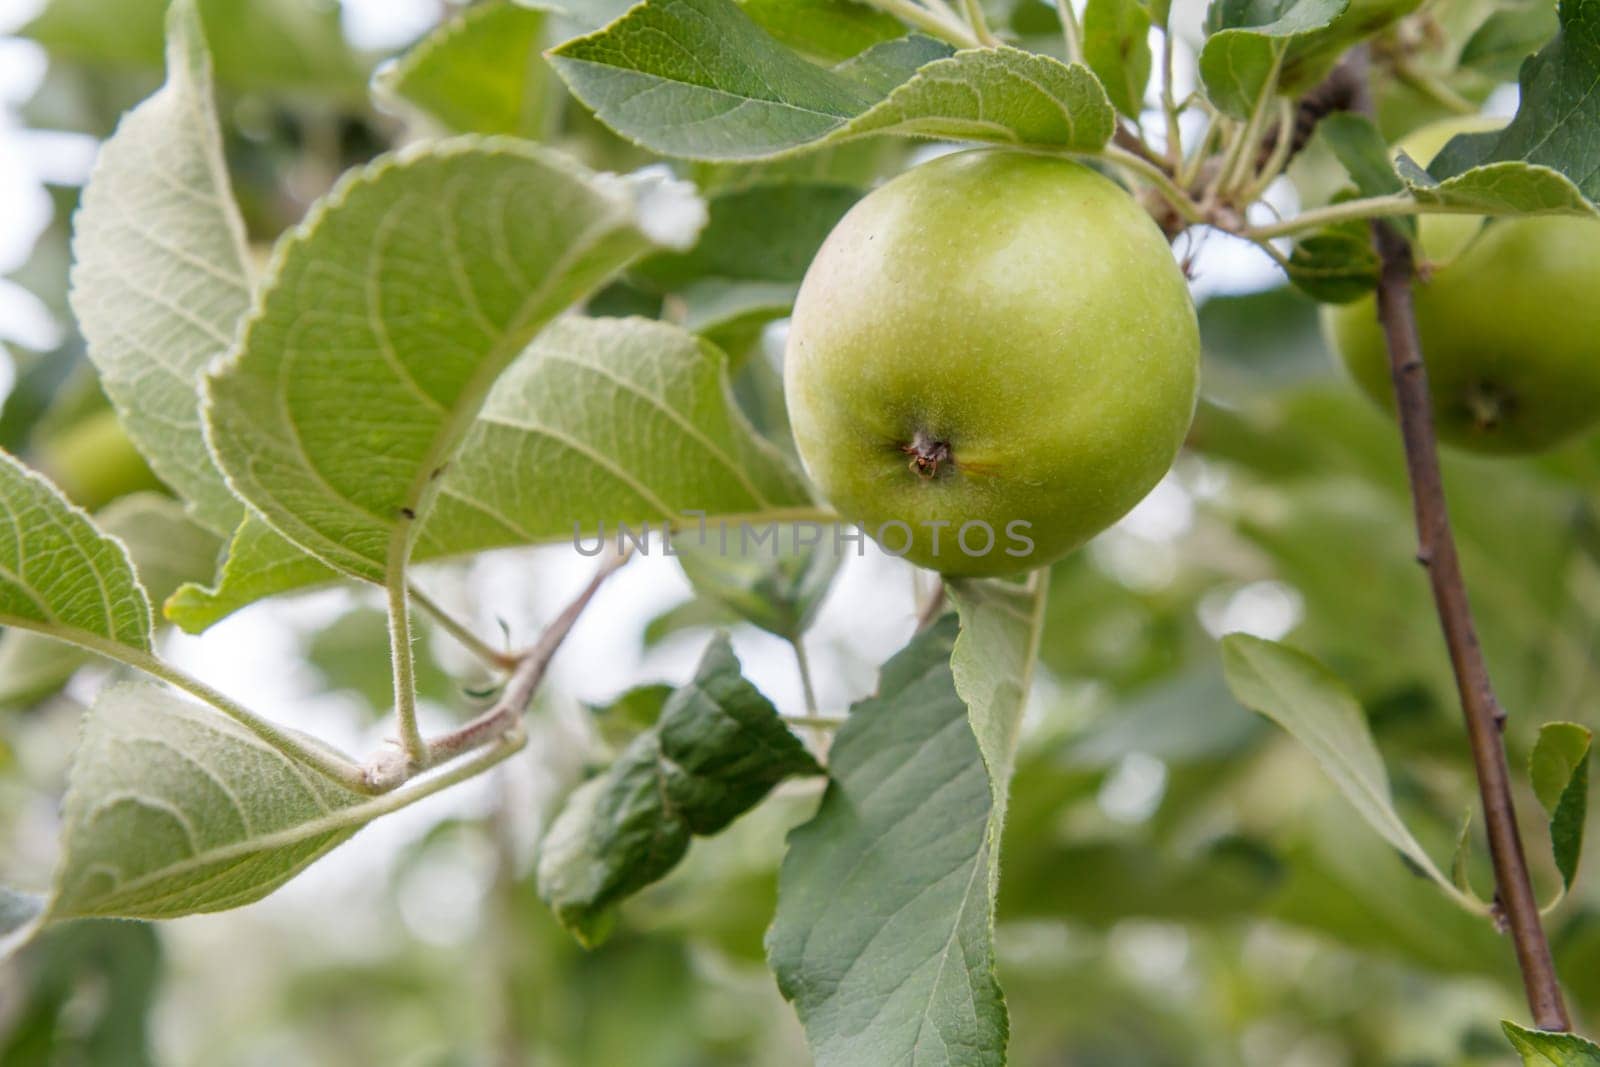 Close-up view of green unripe apple on the tree in the garden in summer day with natural blurred background. Shallow depth of field.